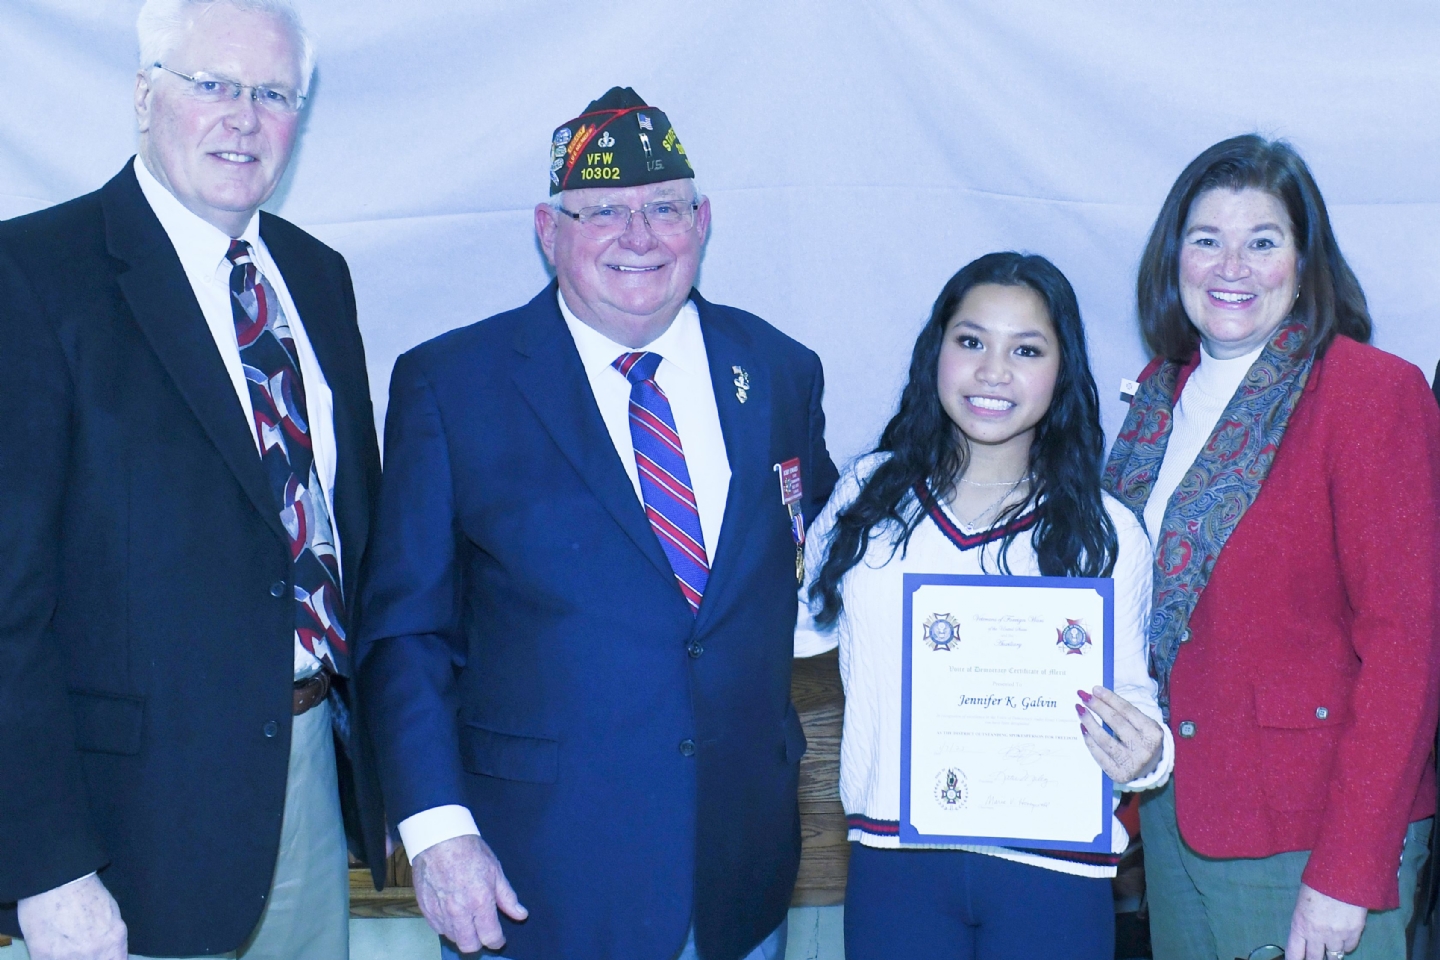 Jennifer Galvin, was awared 1st place honors for 5th District Voice of Democracy. Jennifer will travel to Springfield, Illinois for the VFW Department of Illinois Awards for the District Champions. 